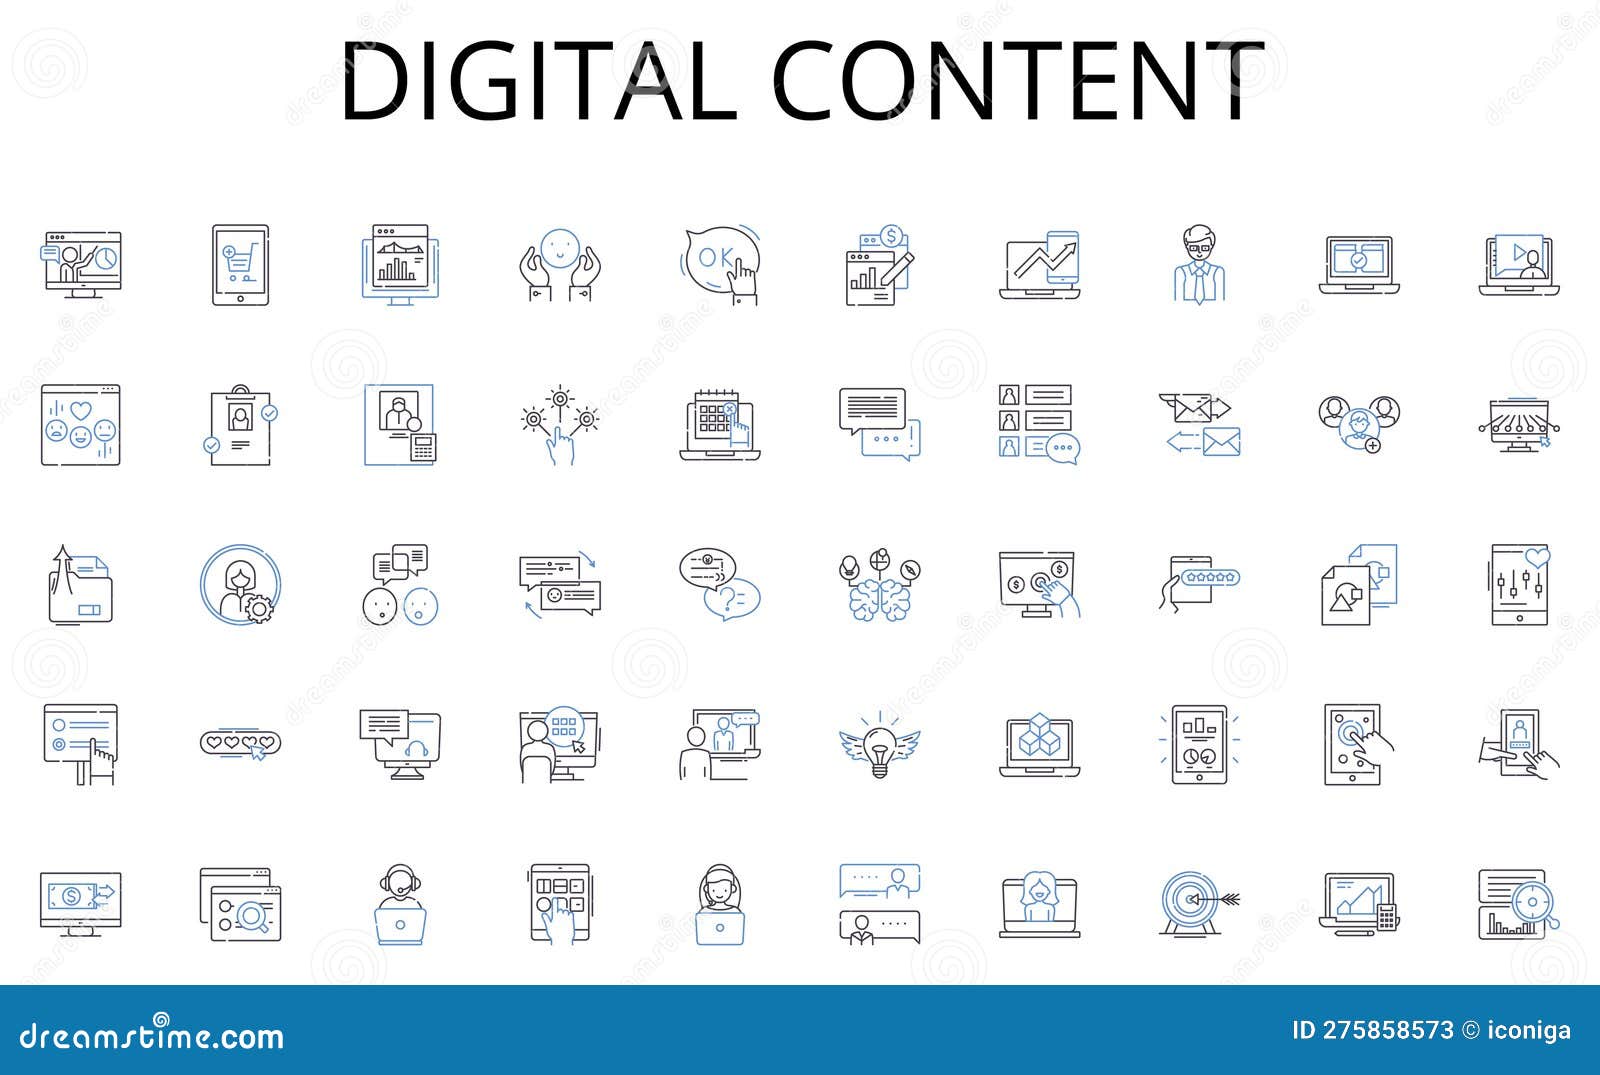 digital content line icons collection. celebration, holiday, merriment, gala, cheer, joy, revelry  and linear